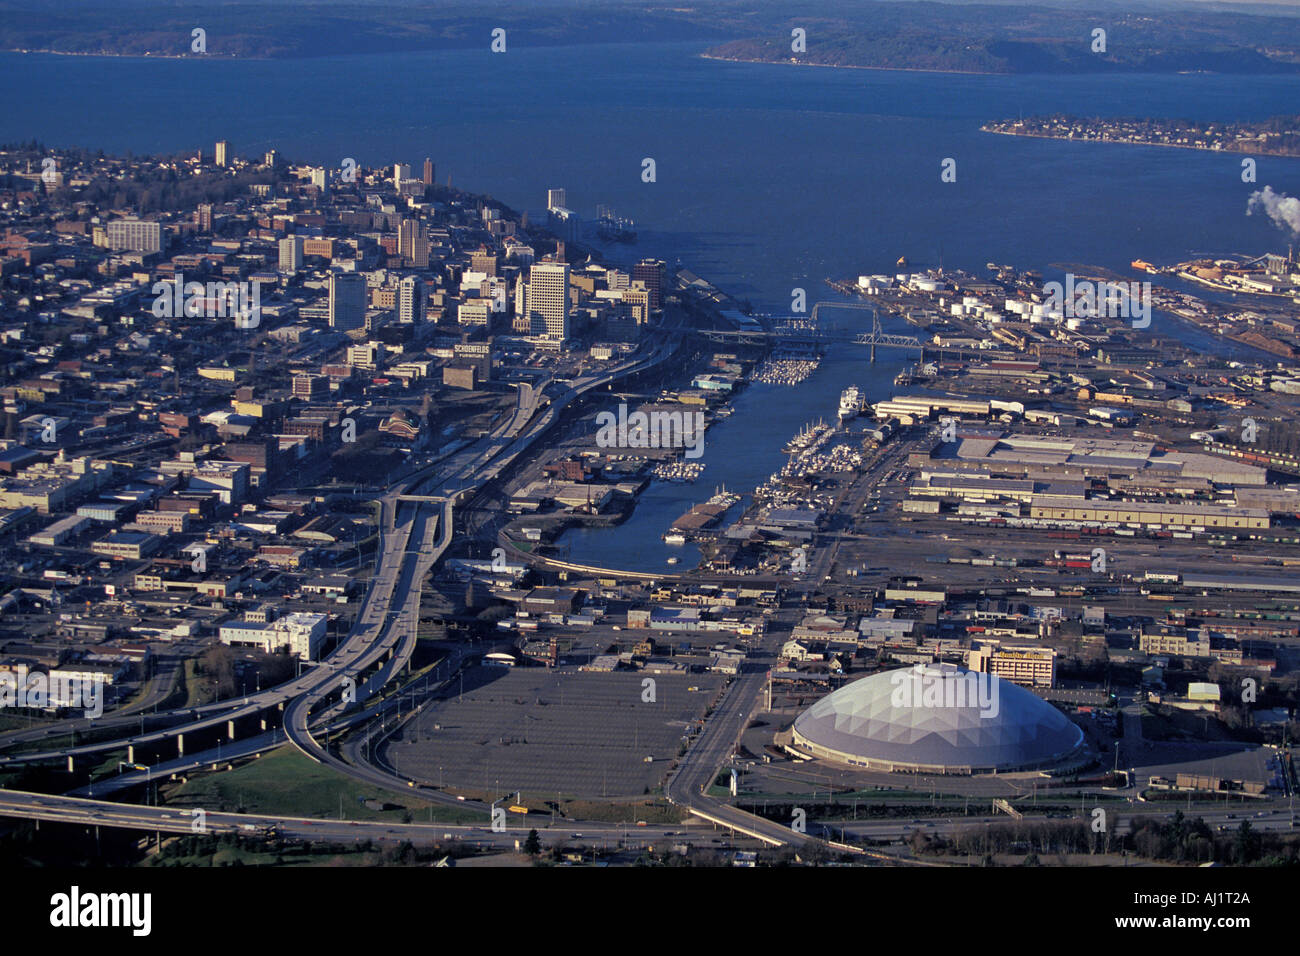 Aerial View Of Downtown Tacoma Washington With Tacoma Dome Arena In Foreground And Commencement Bay In Back Stock Photo